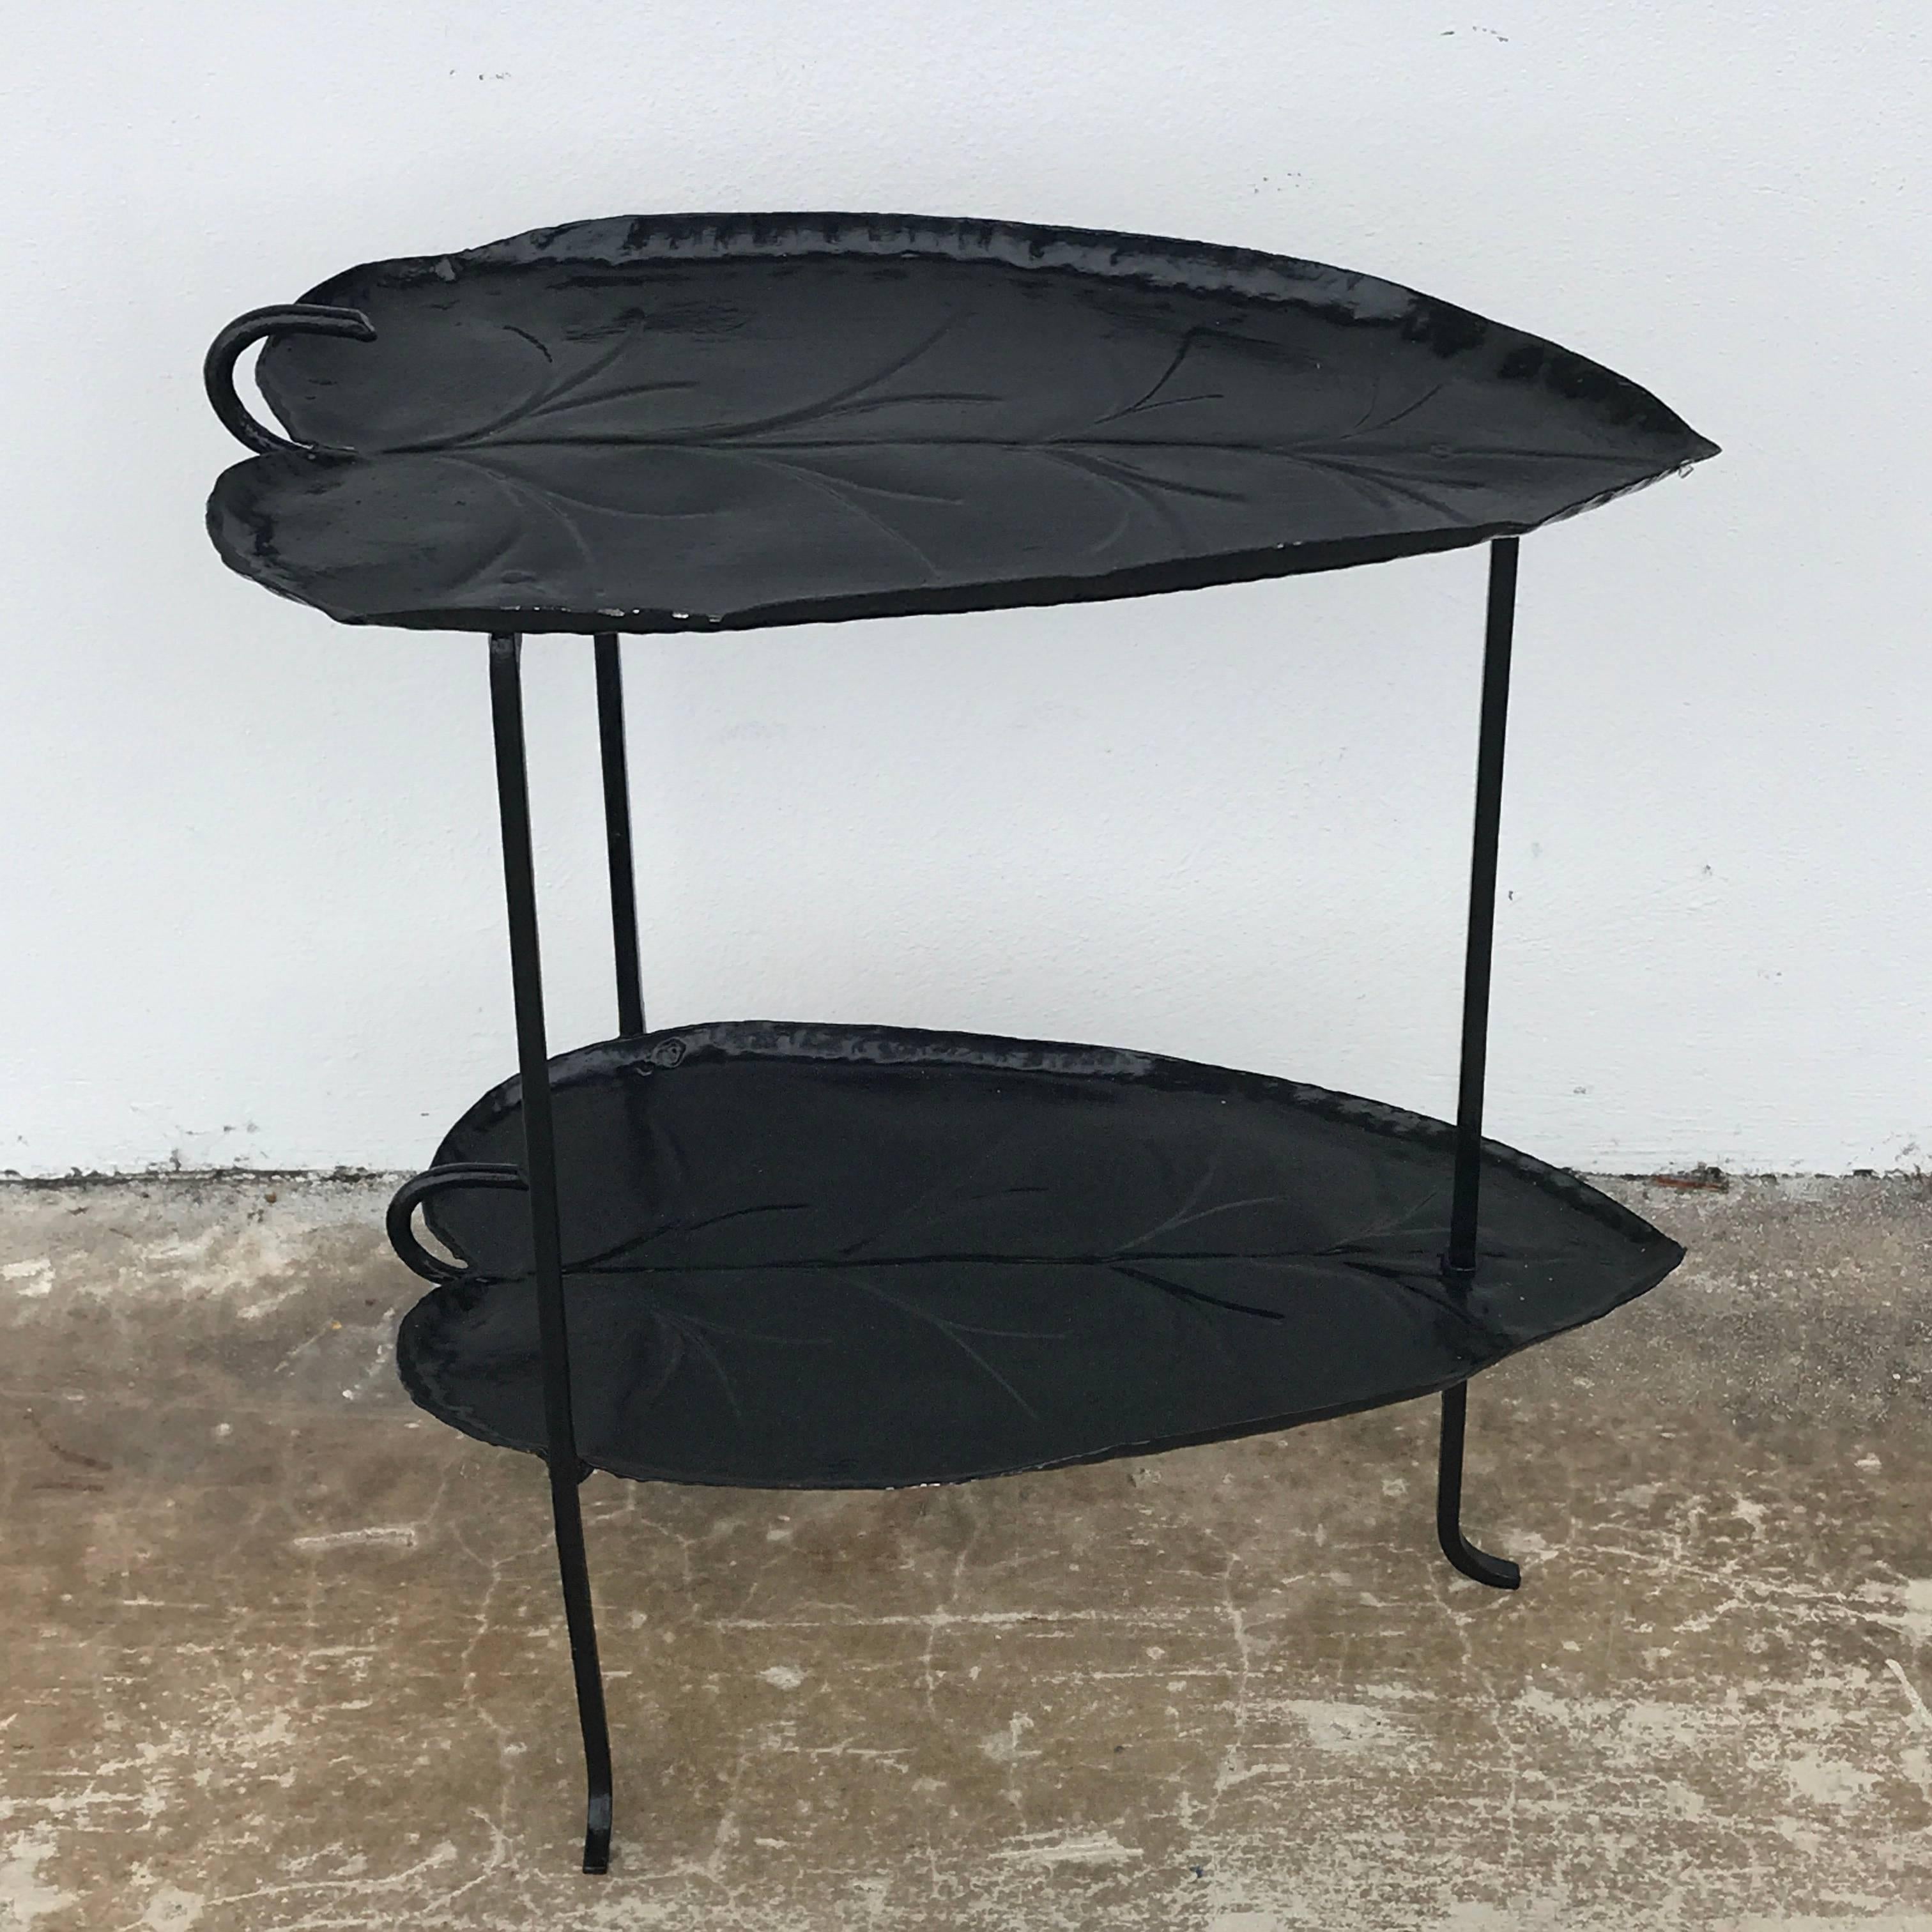 Rare Salterini two-tier leaf motif table, consisting of two 18" oval leafs raised on three sleek wrought iron legs, realistically cast and modeled. The height of the interior of the second shelf is 13.5" H.